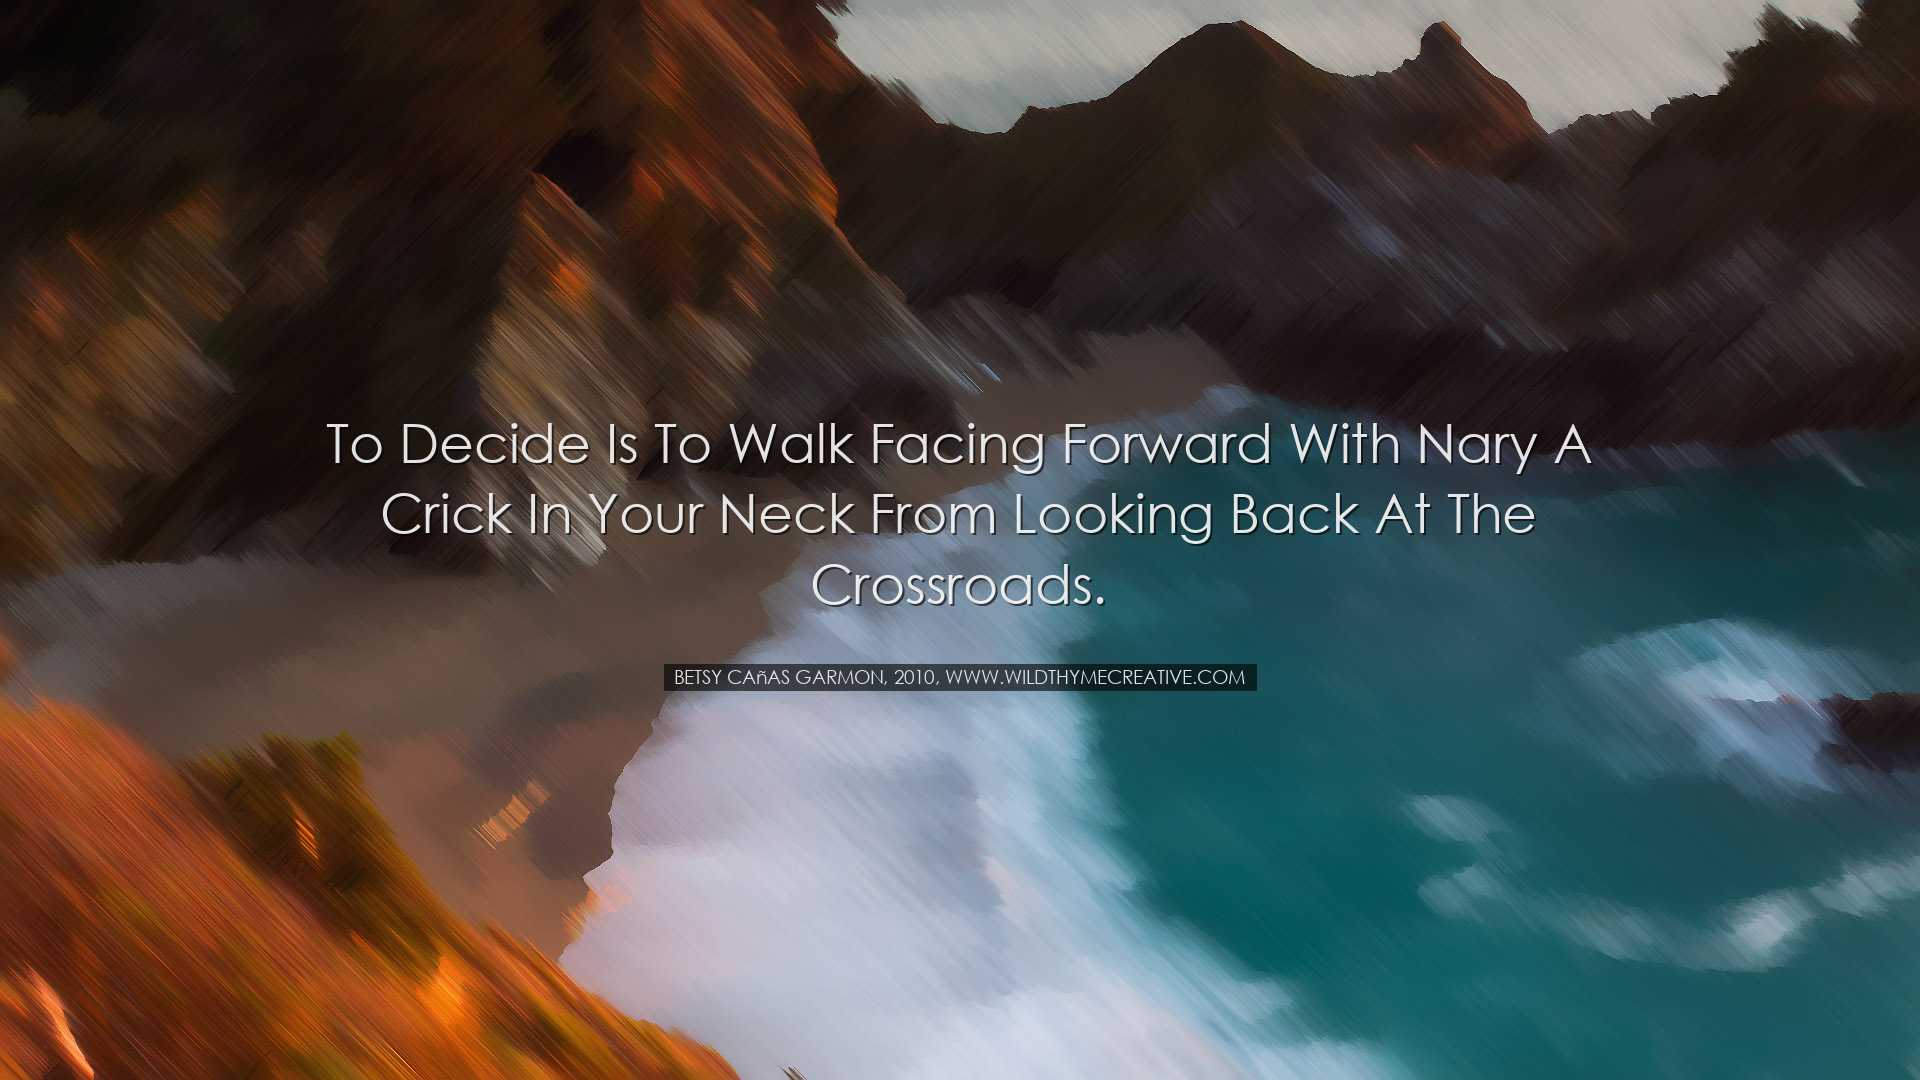 To decide is to walk facing forward with nary a crick in your neck